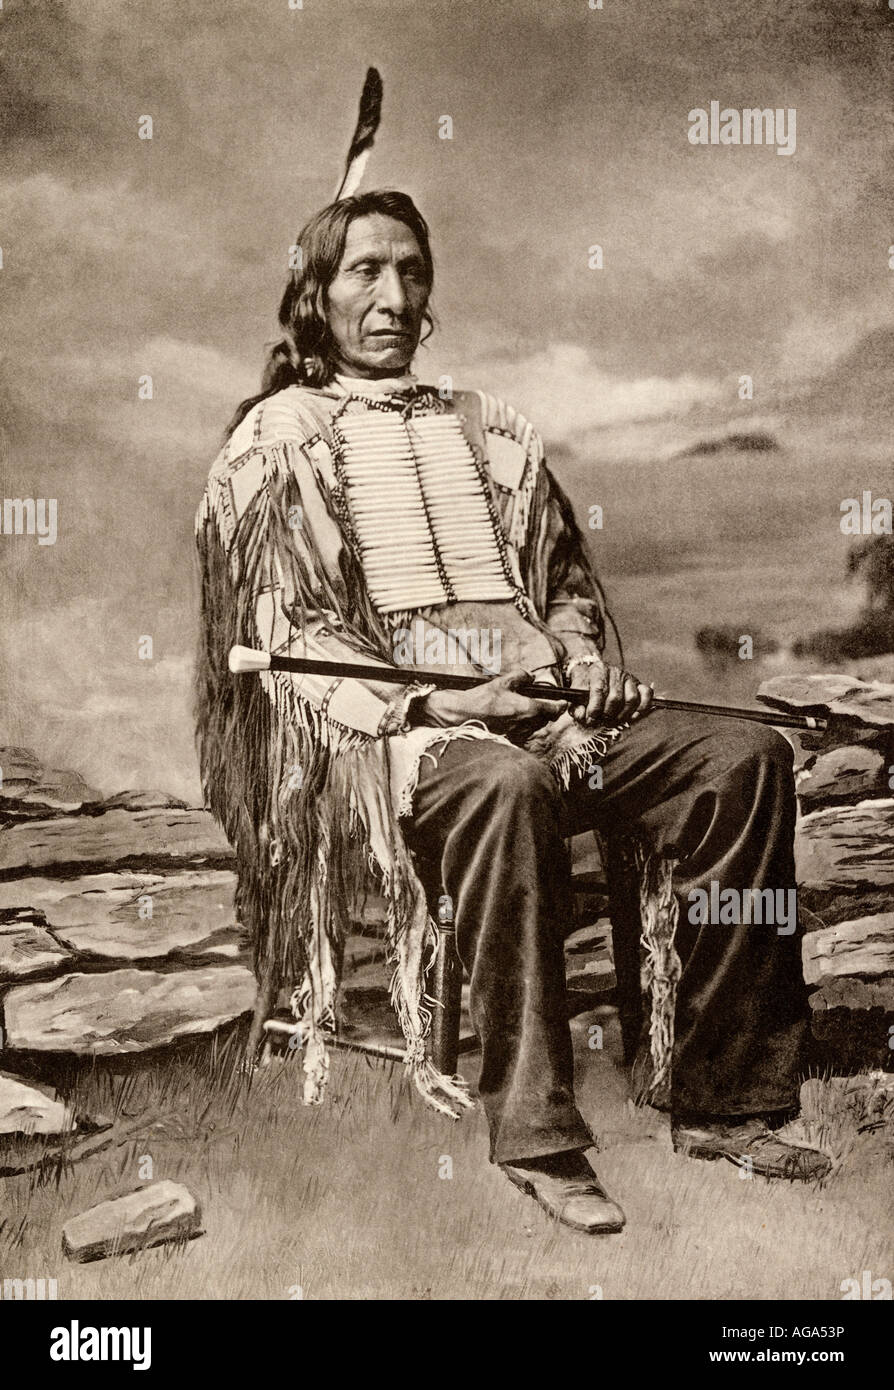 Red Cloud oder Mahpiua Luta Oglala Sioux chief In quillwork Shirt 1890. Albertype (Foto) Stockfoto